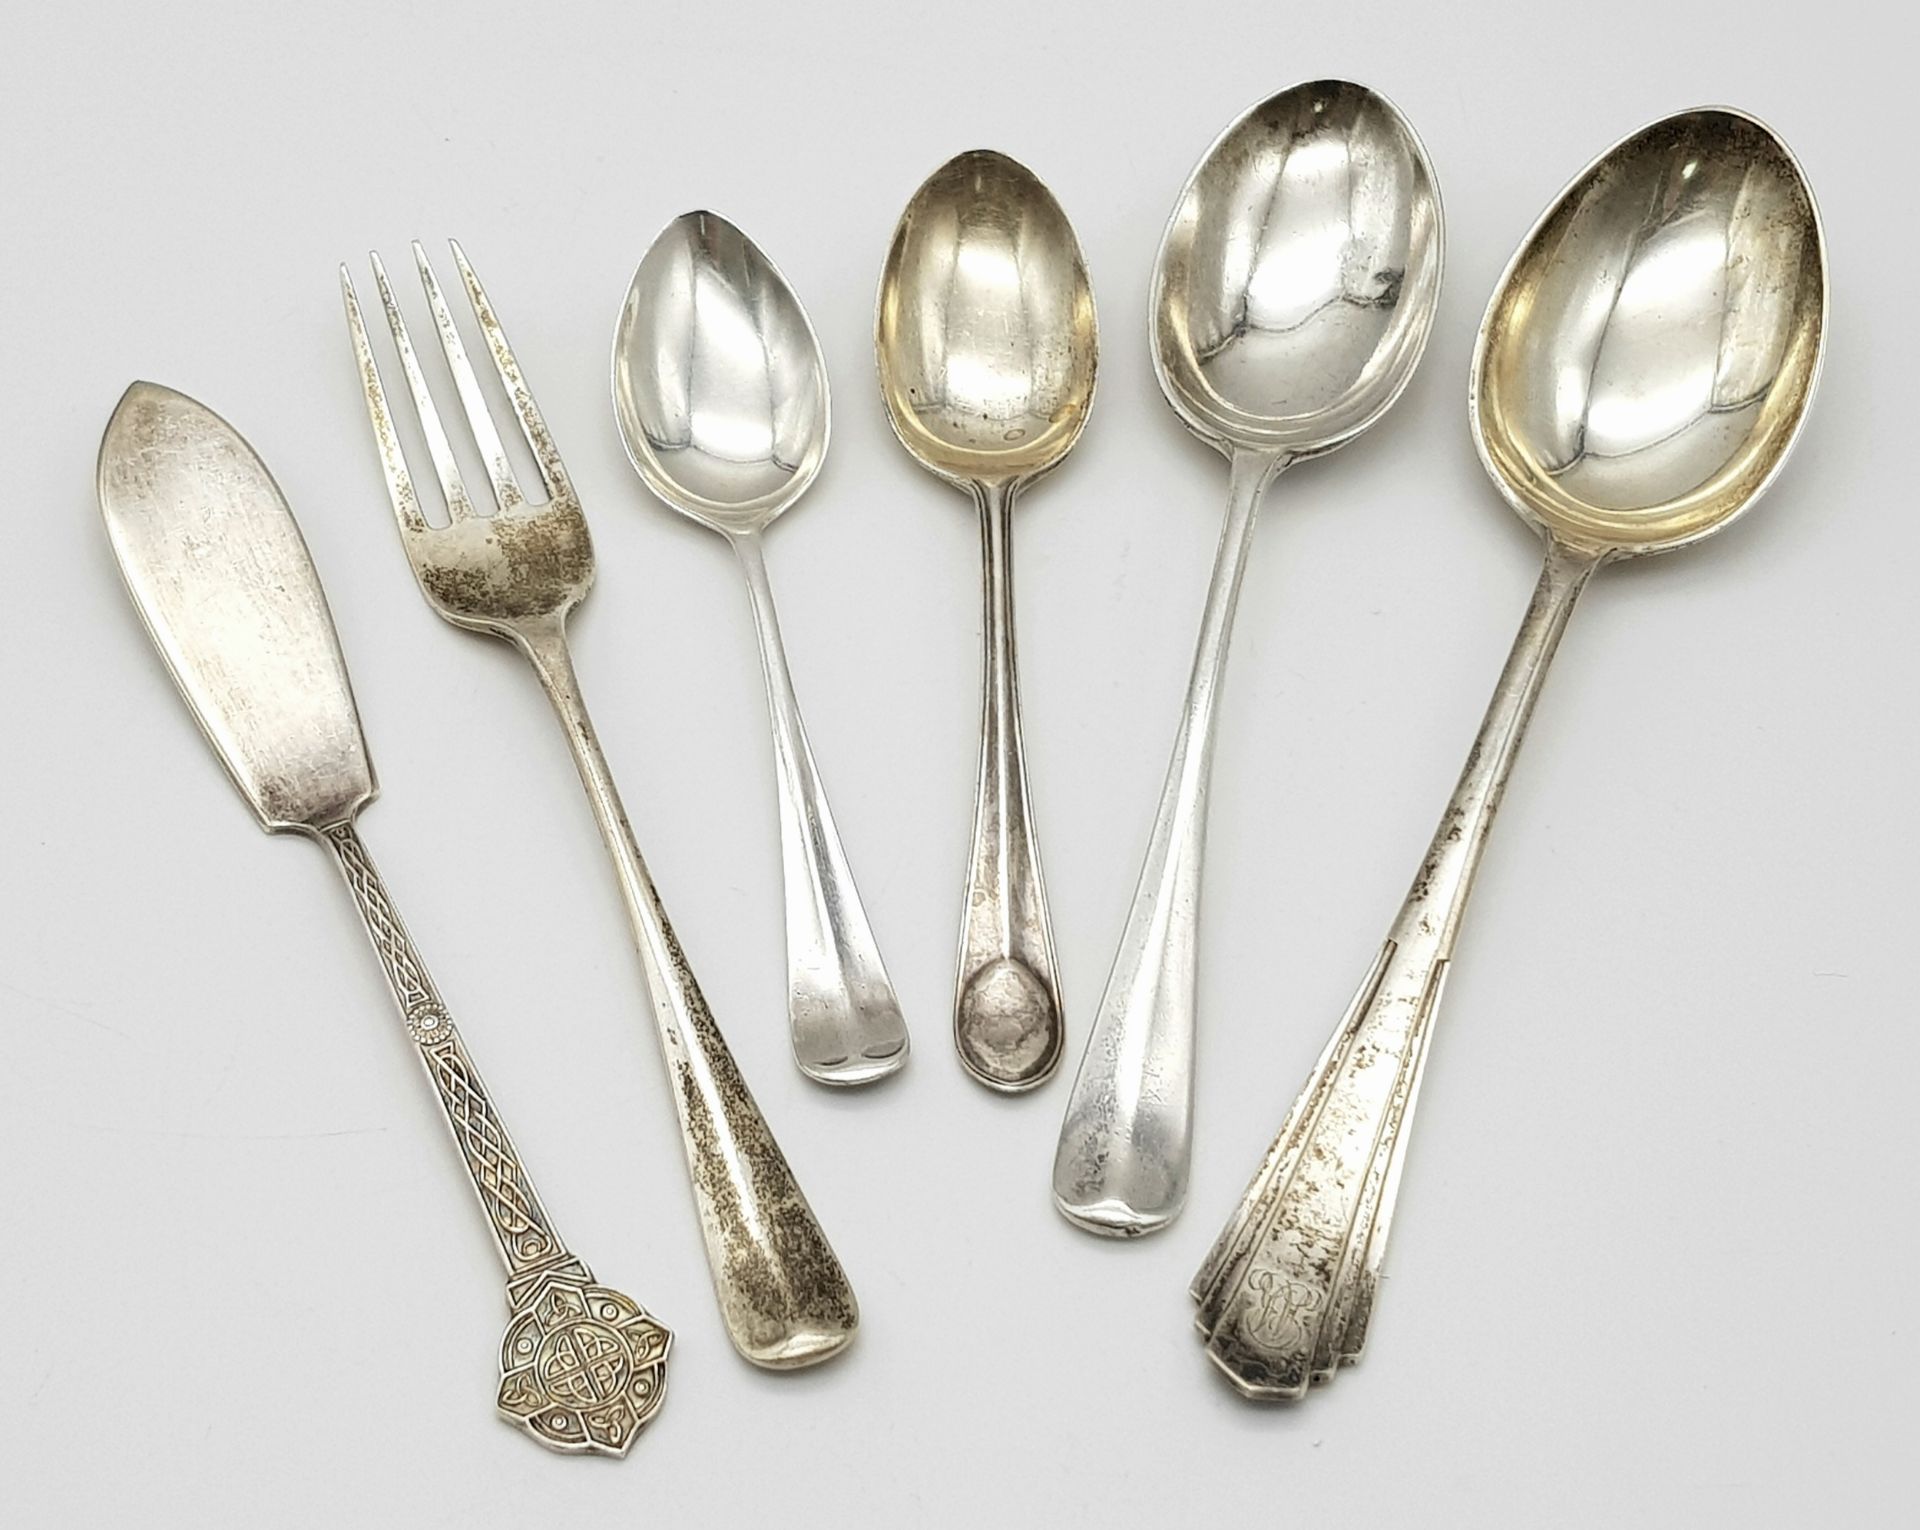 A Small Selection of Sterling Silver Flatware: 2 x teaspoon, 2 x spoon fish knife and fork. All - Bild 3 aus 5